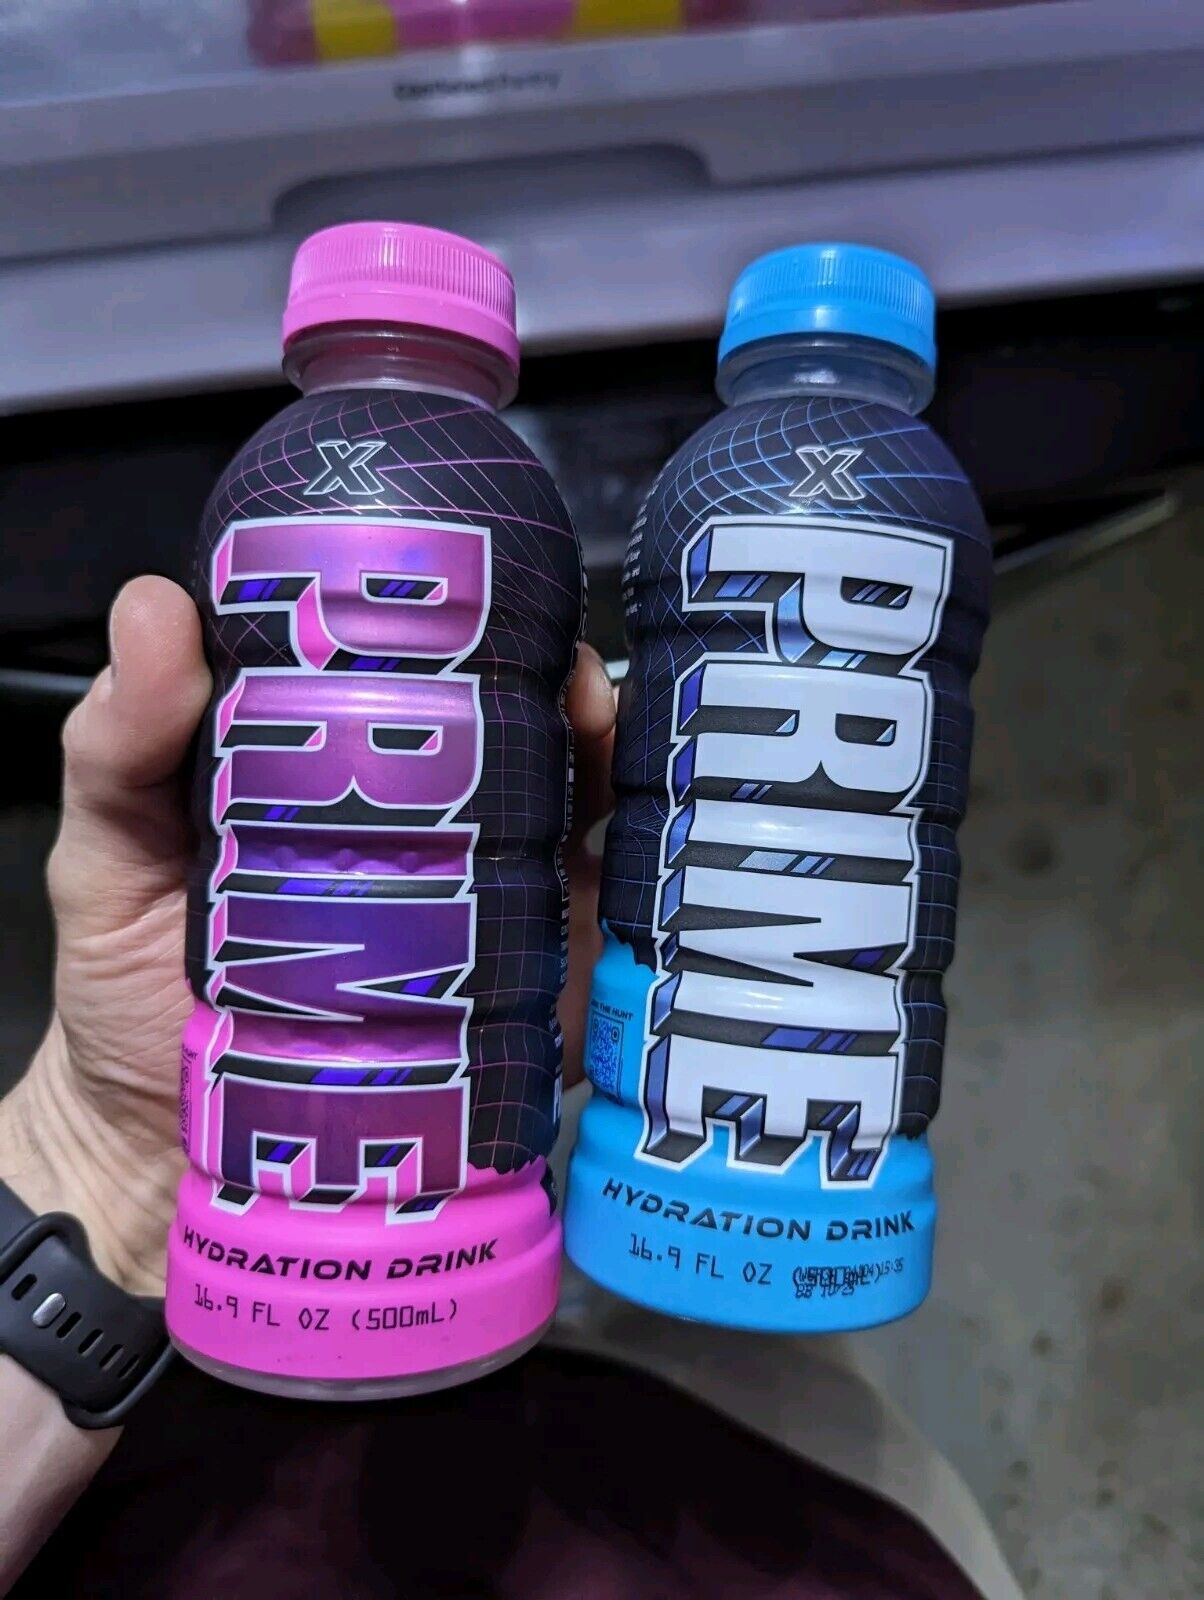 PRIME HYDRATION X 2 BOTTLES - The hunt for hydration - Sealed - IN HAND RARE